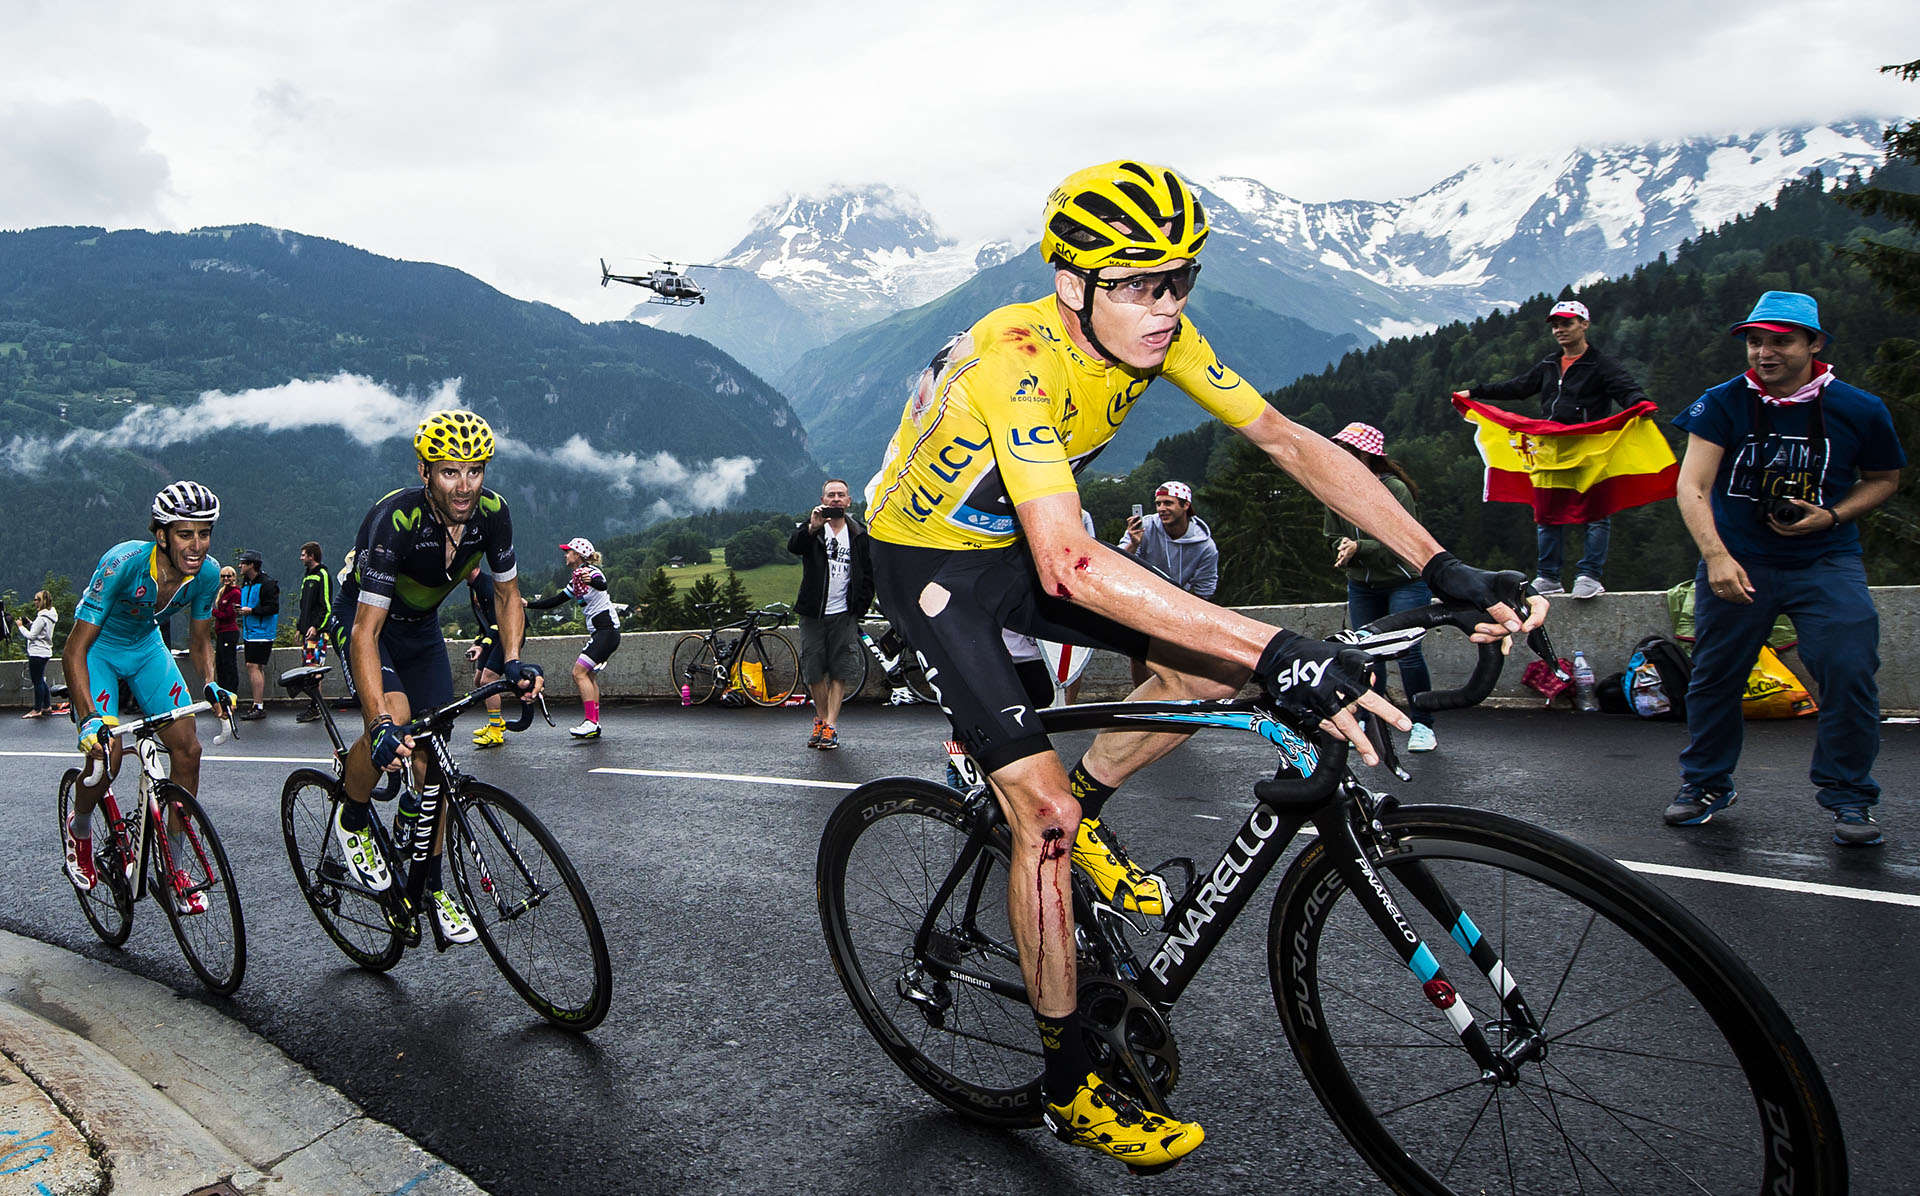 Tour de France 2016 - Stage Nineteen - Chris Froome rides during the stage